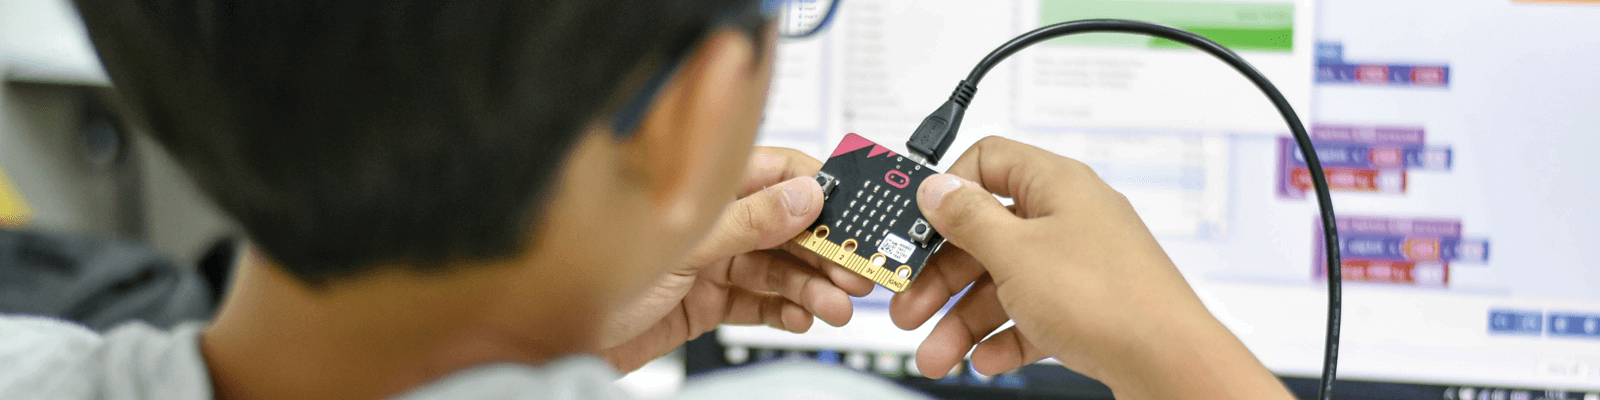 A young child looking at a microbit